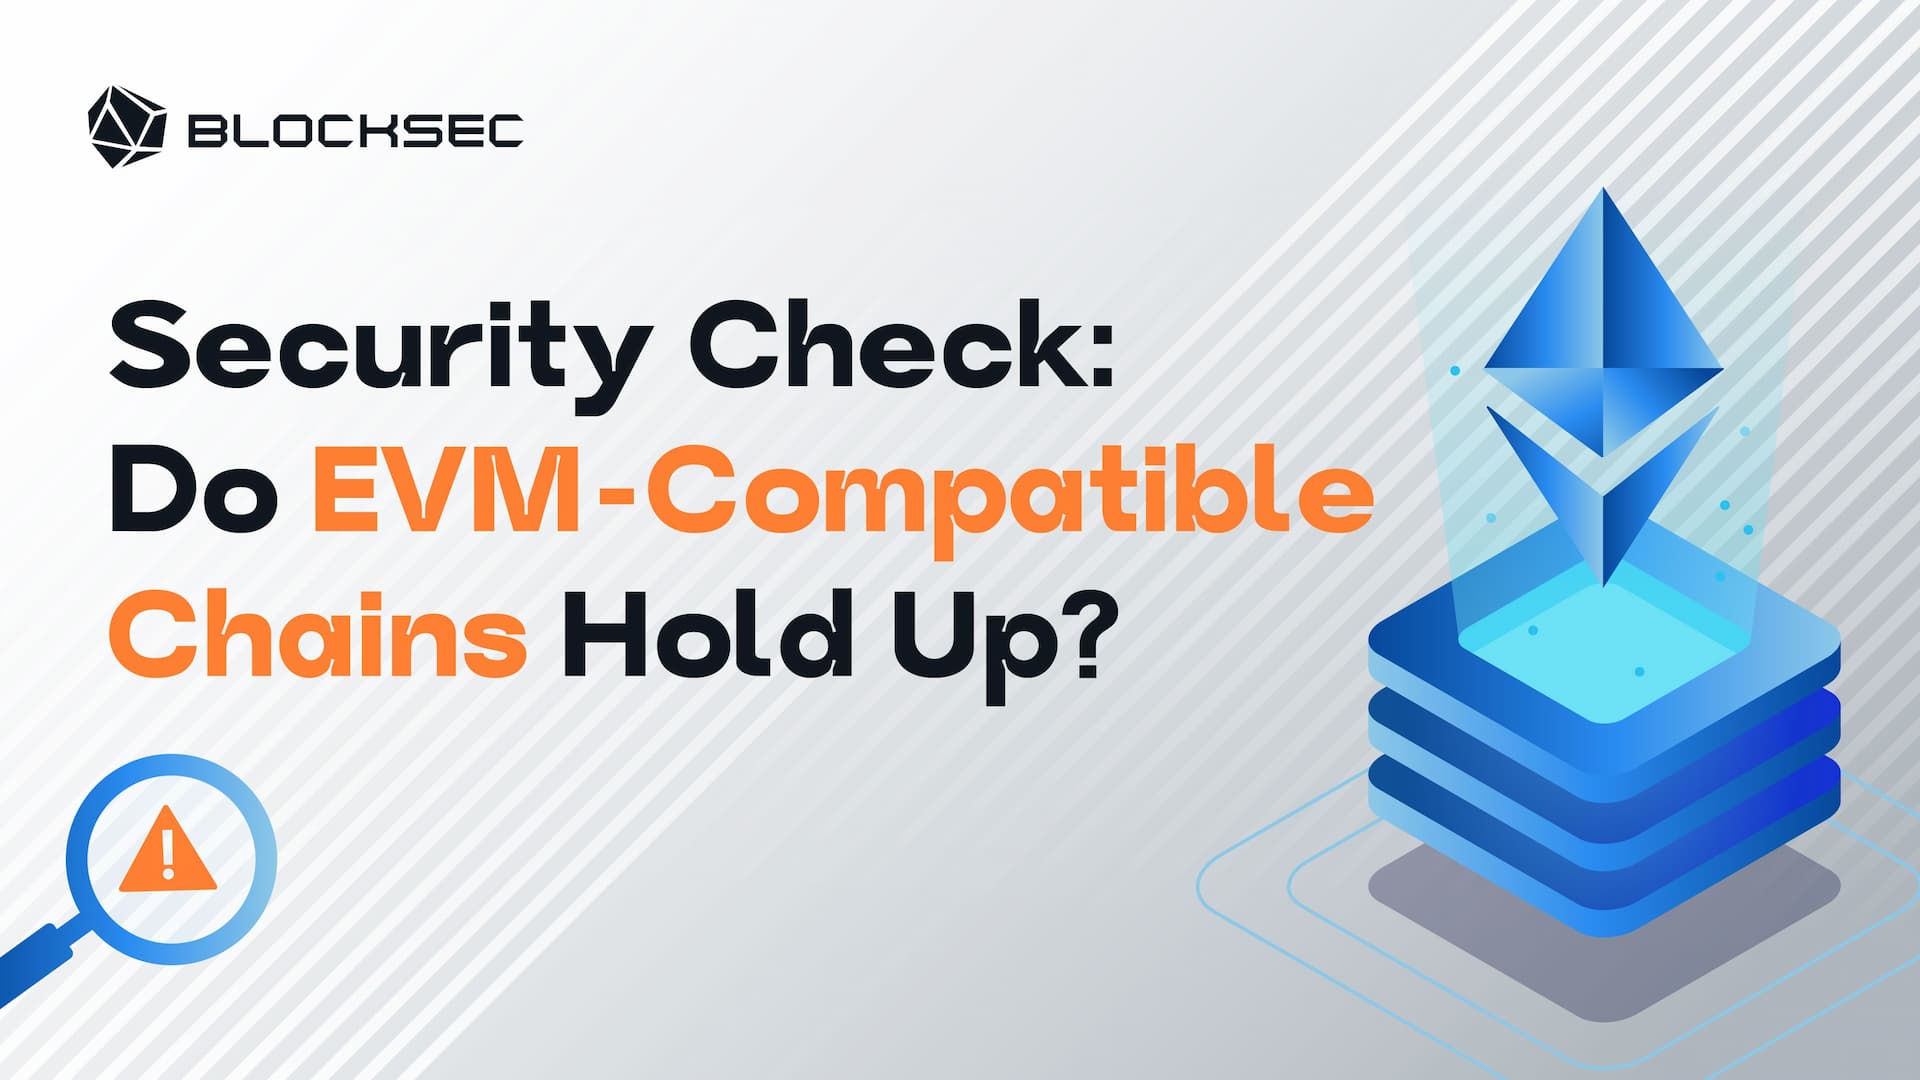 Security Check: Do EVM-Compatible Chains Hold Up?